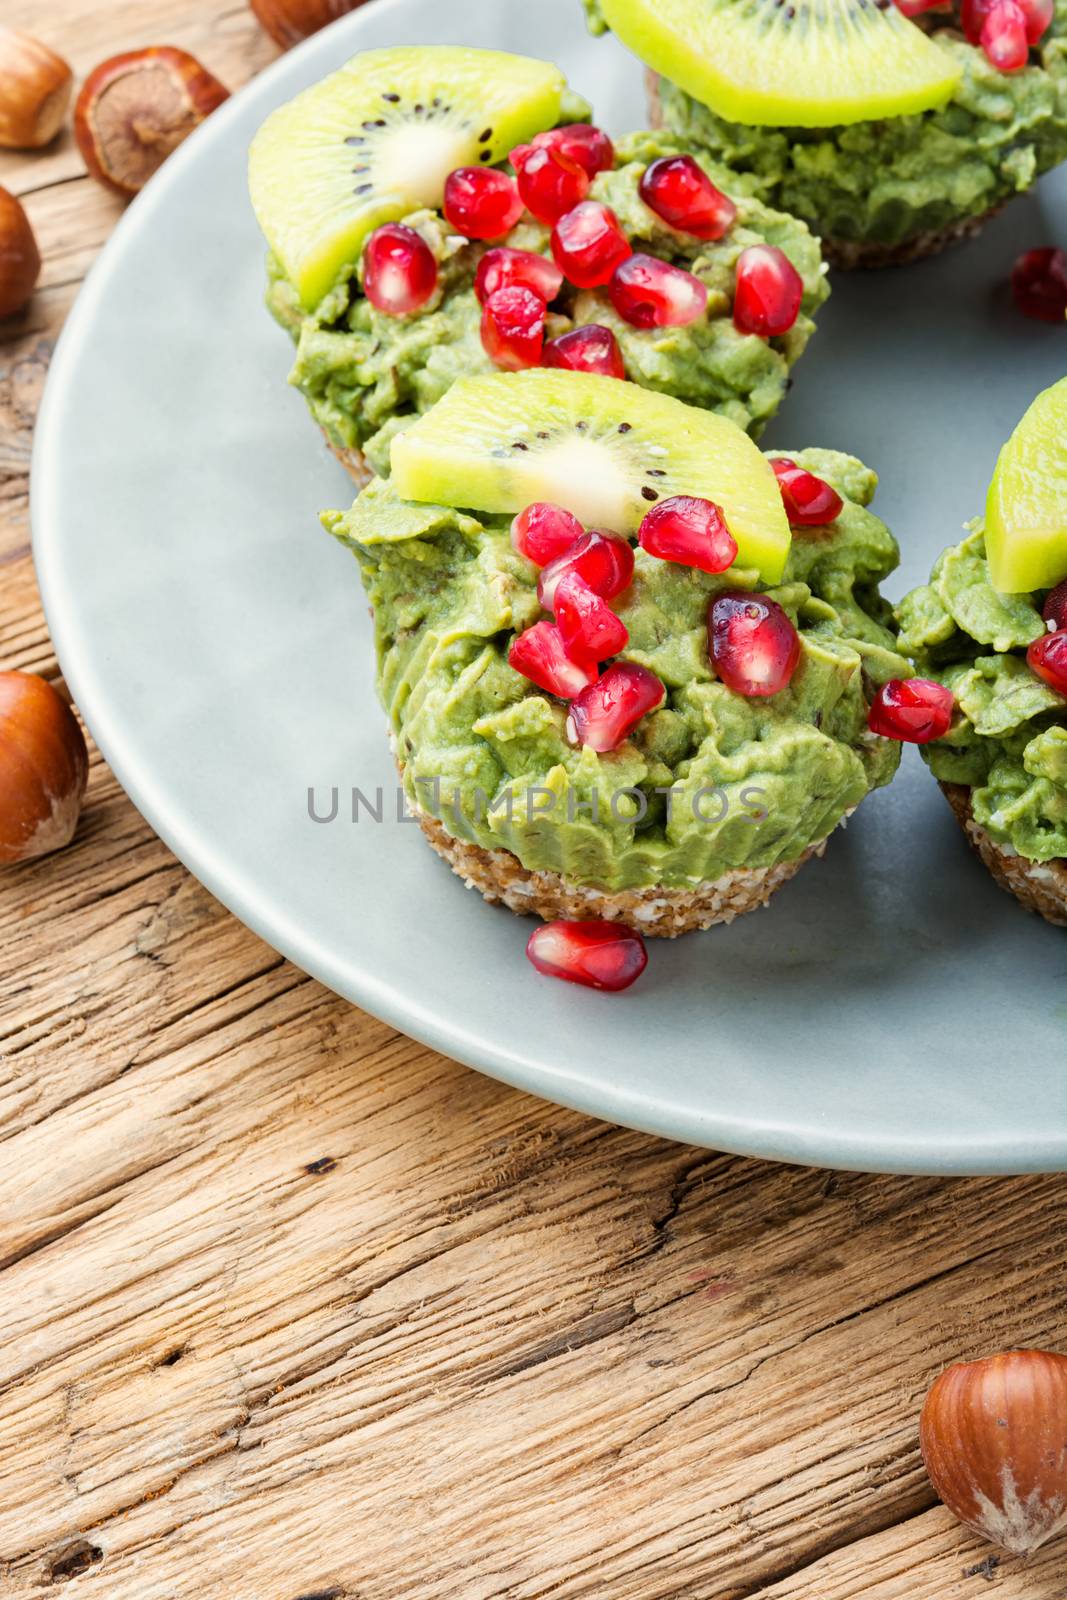 Avocado cupcakes or muffin garnished with kiwi and pomegranate.Cupcakes, close-up.